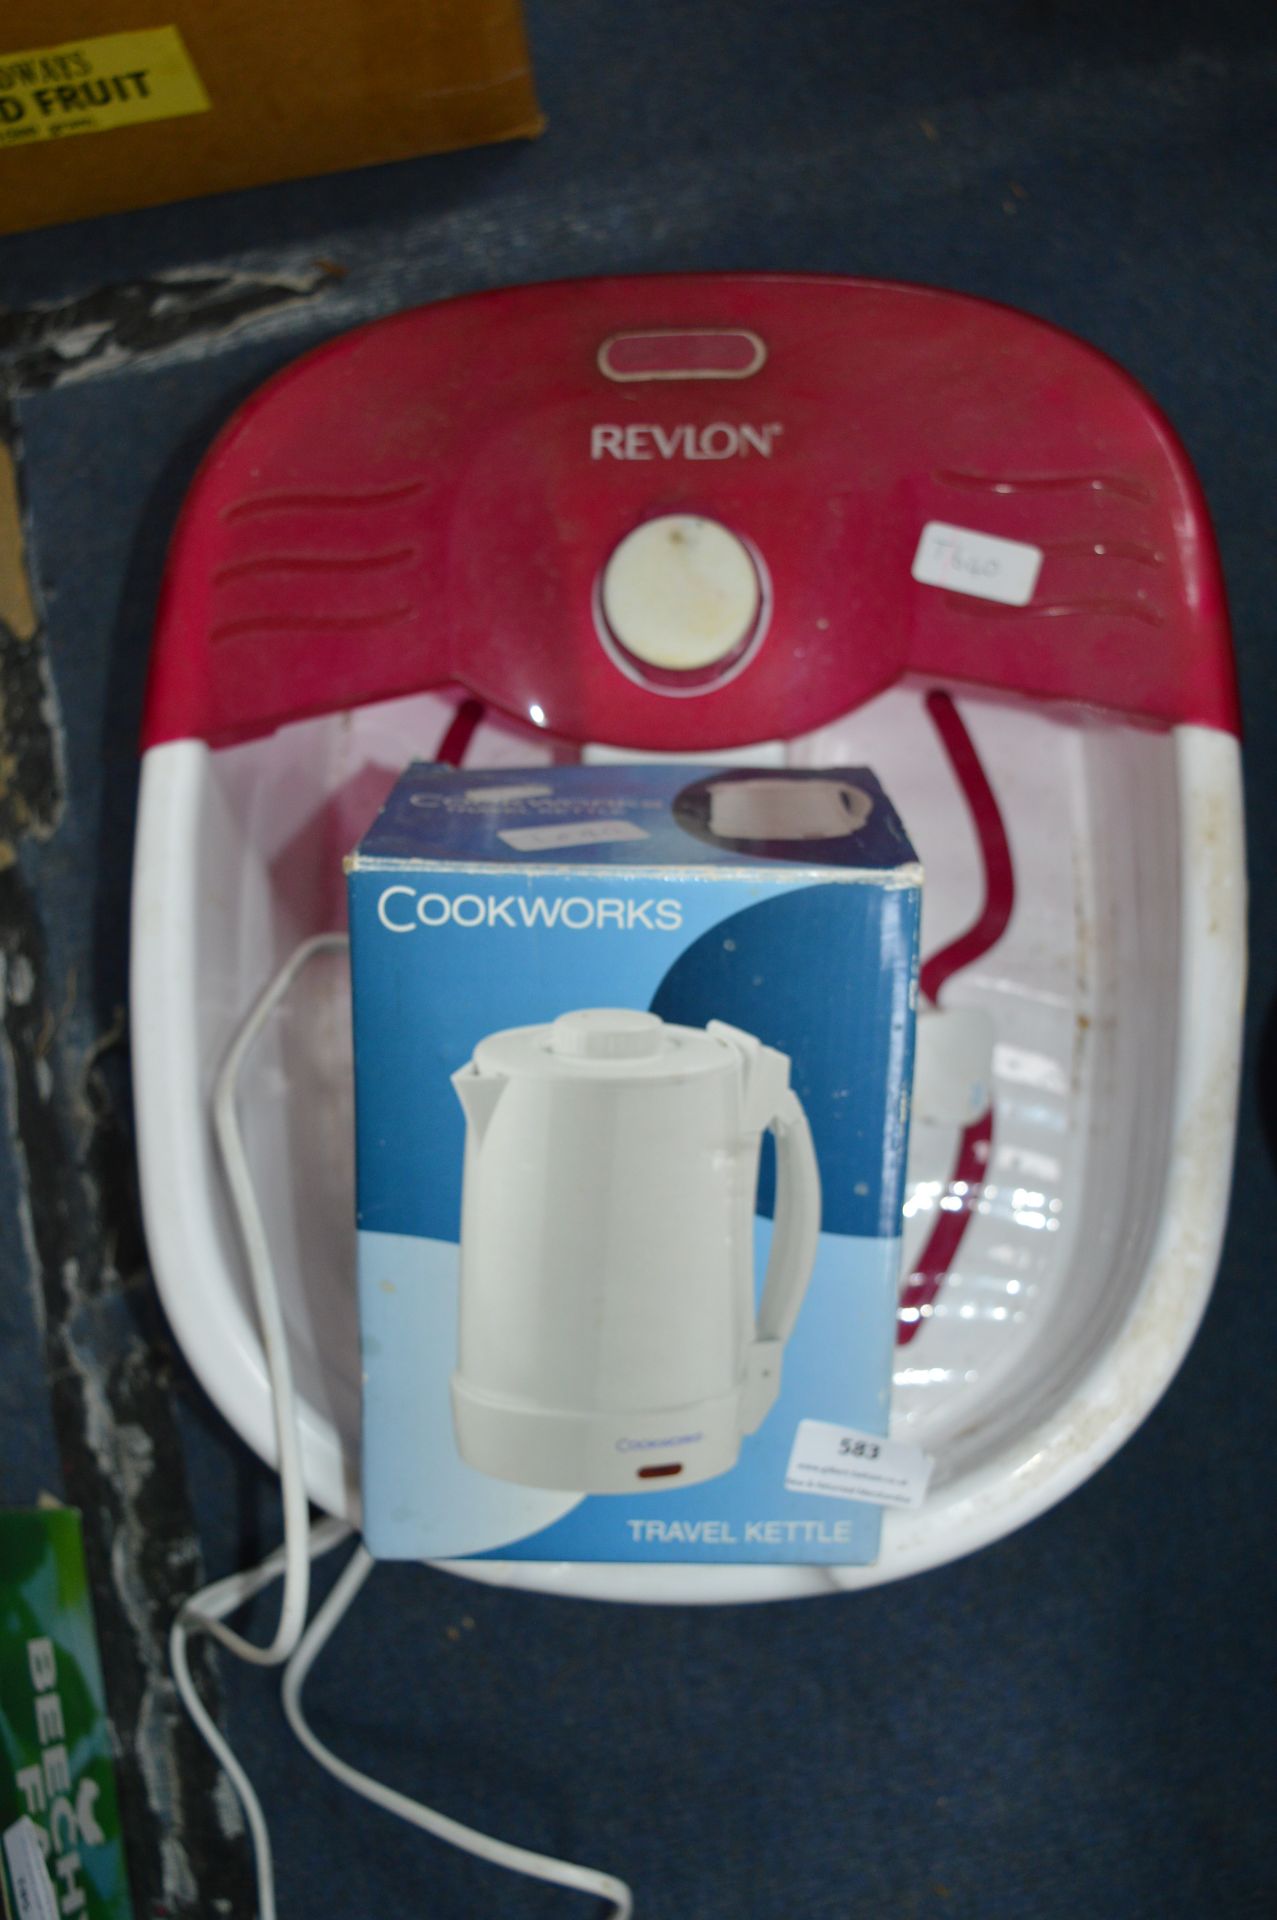 Revlon Foot Spa and a Travel Kettle